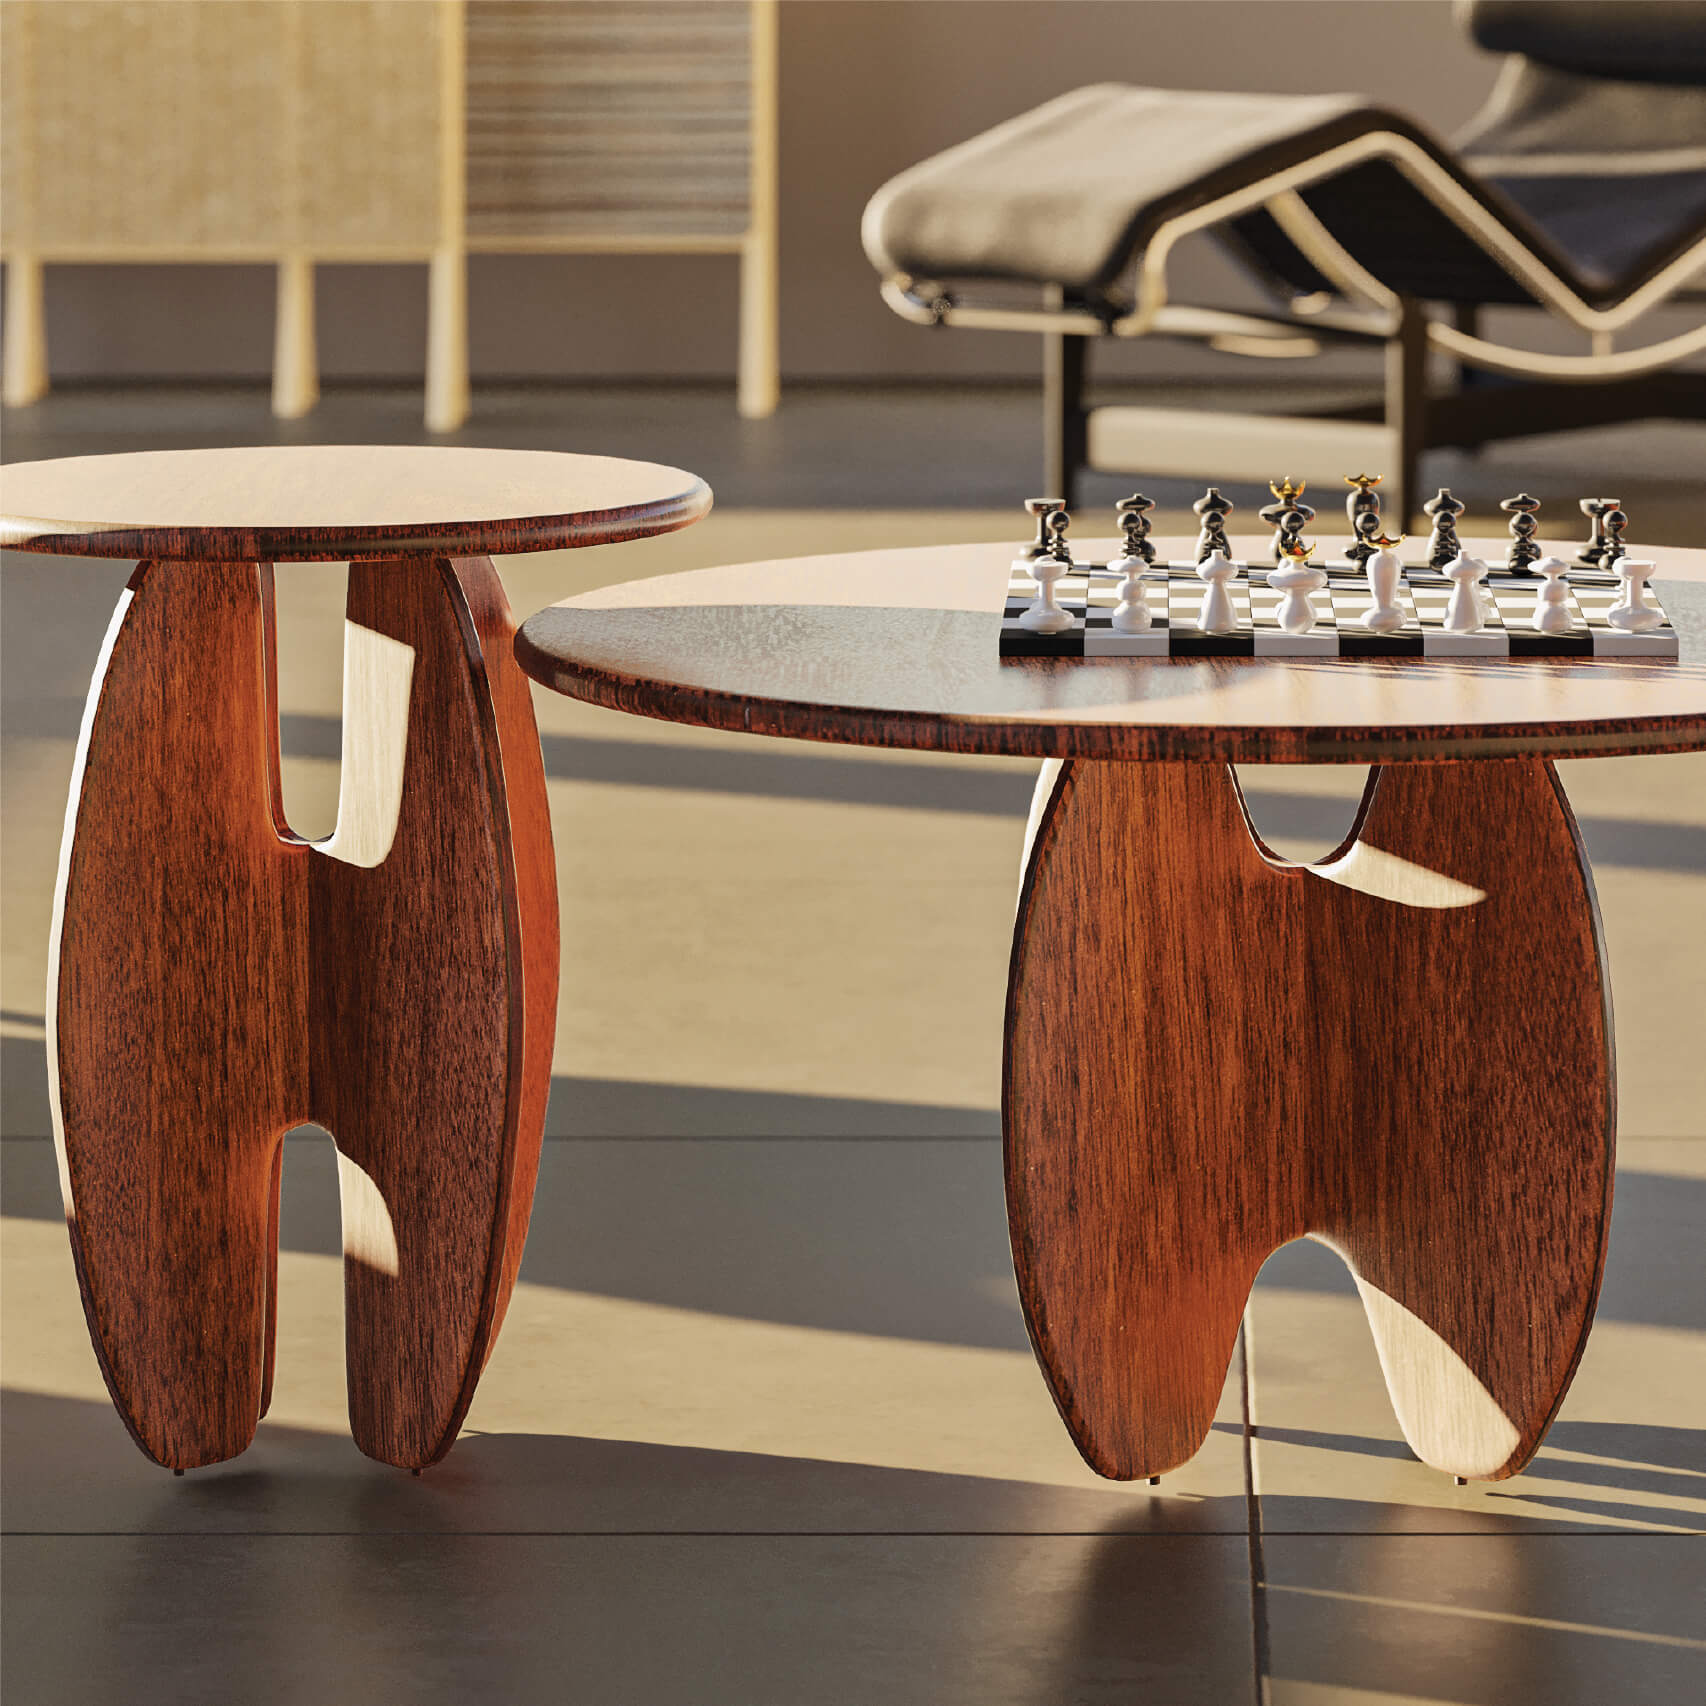 SIDE TABLE / COFFEE TABLE by Triboa Bay - Design Commune Feature